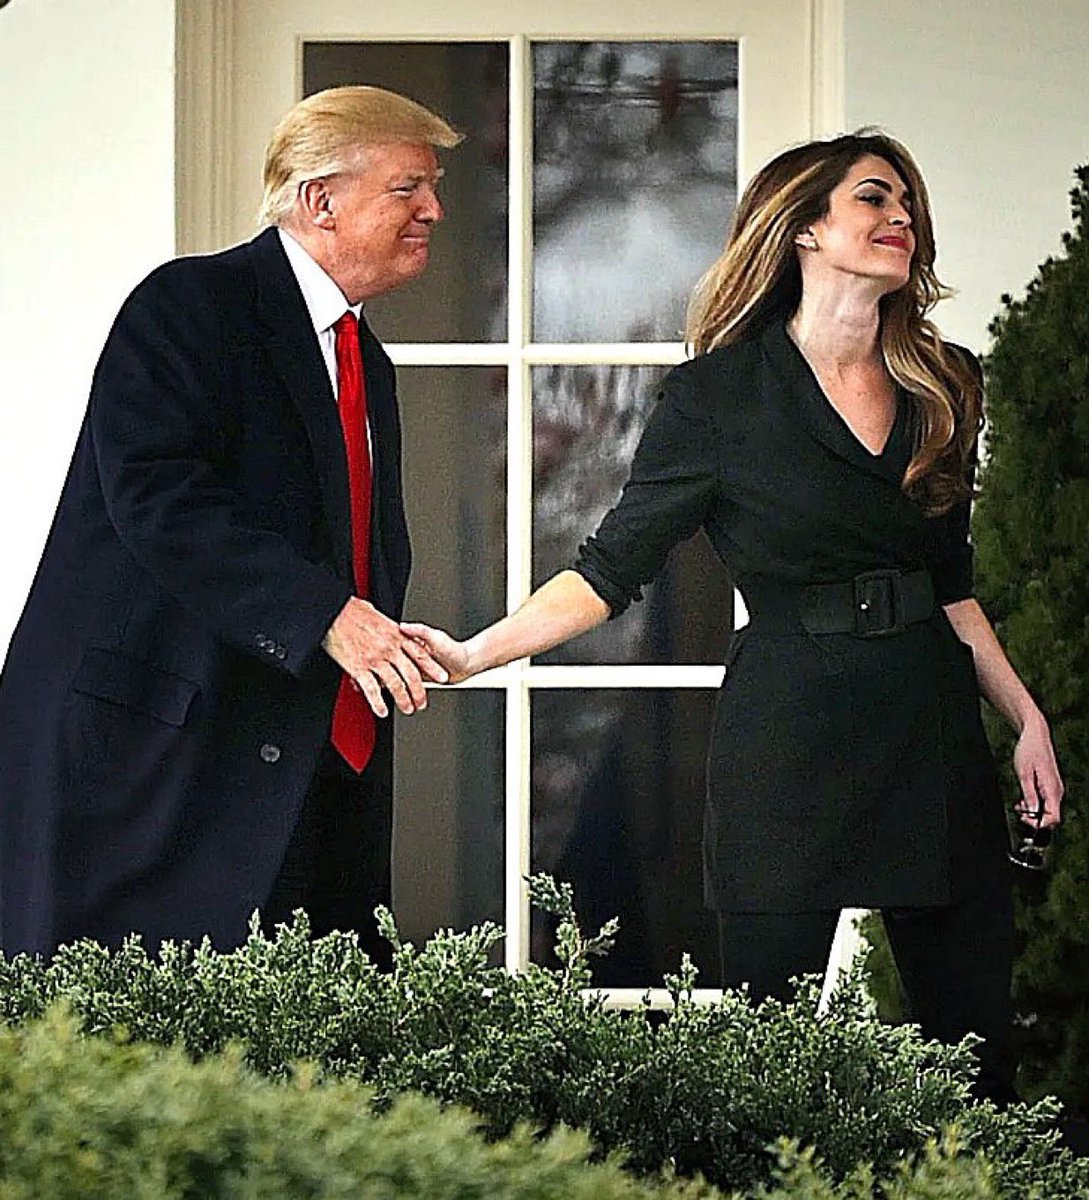 Hope Hicks testimony exposes Trump as the massive Fraud and Liar that he is…once again. He always wanted her to fuck him….well she just did This 💩 is 😂😂😂😂😂